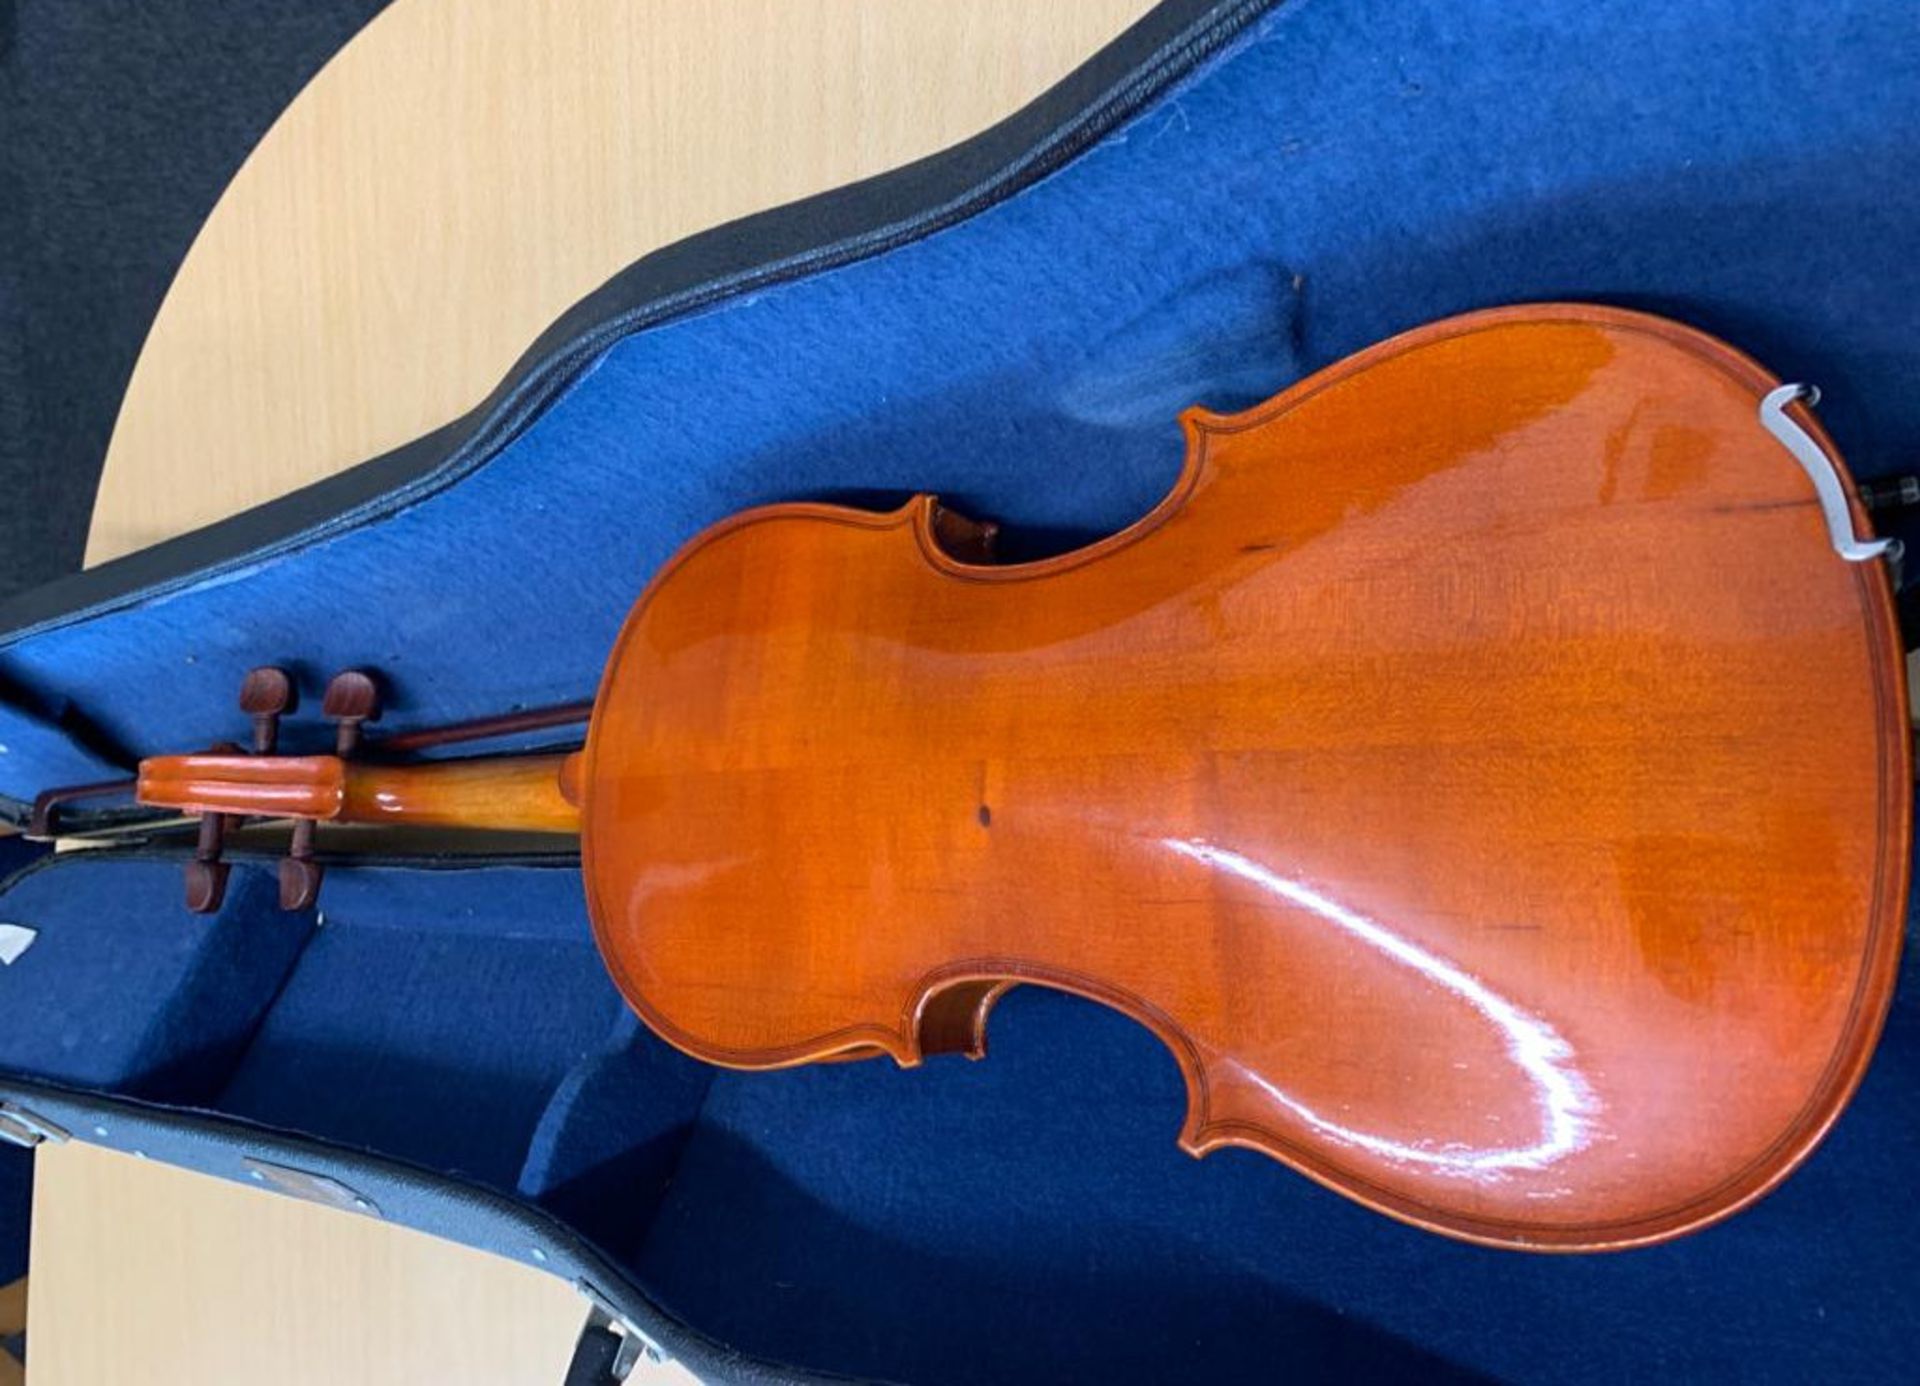 1 X Violin With Case - Ref: 101 - CL464 - Location: Liverpool L19 - Image 2 of 2